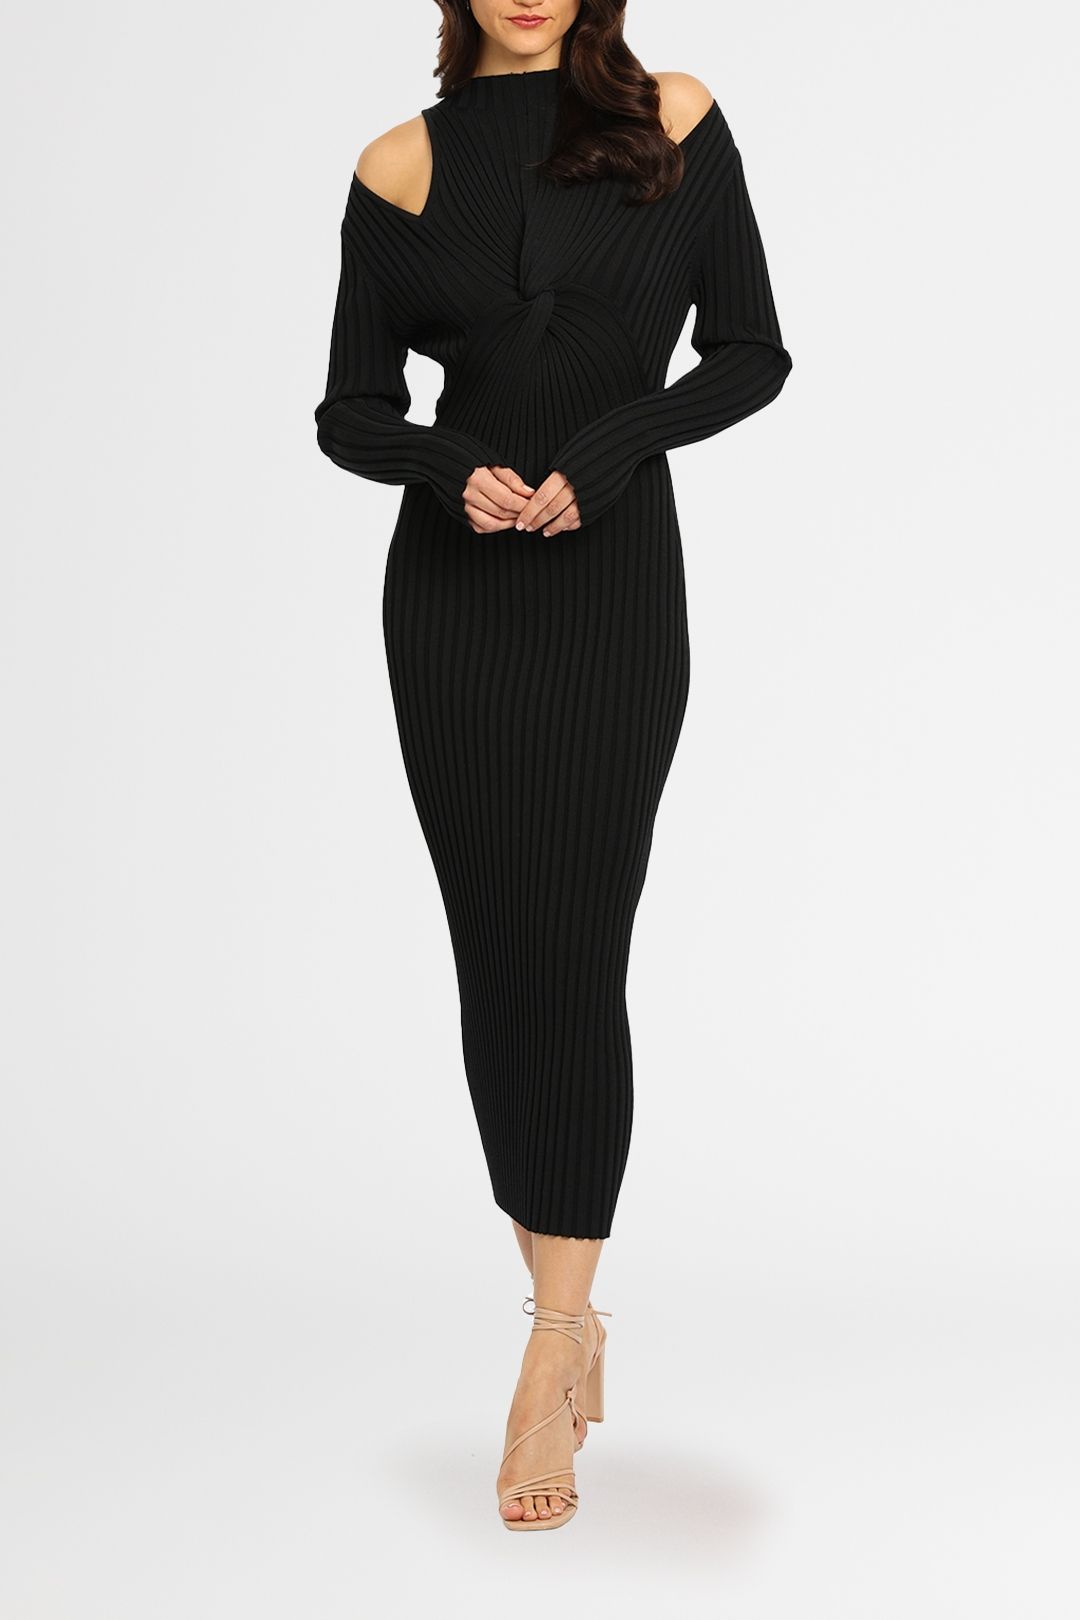 Collins Dress Black Acler bodycon